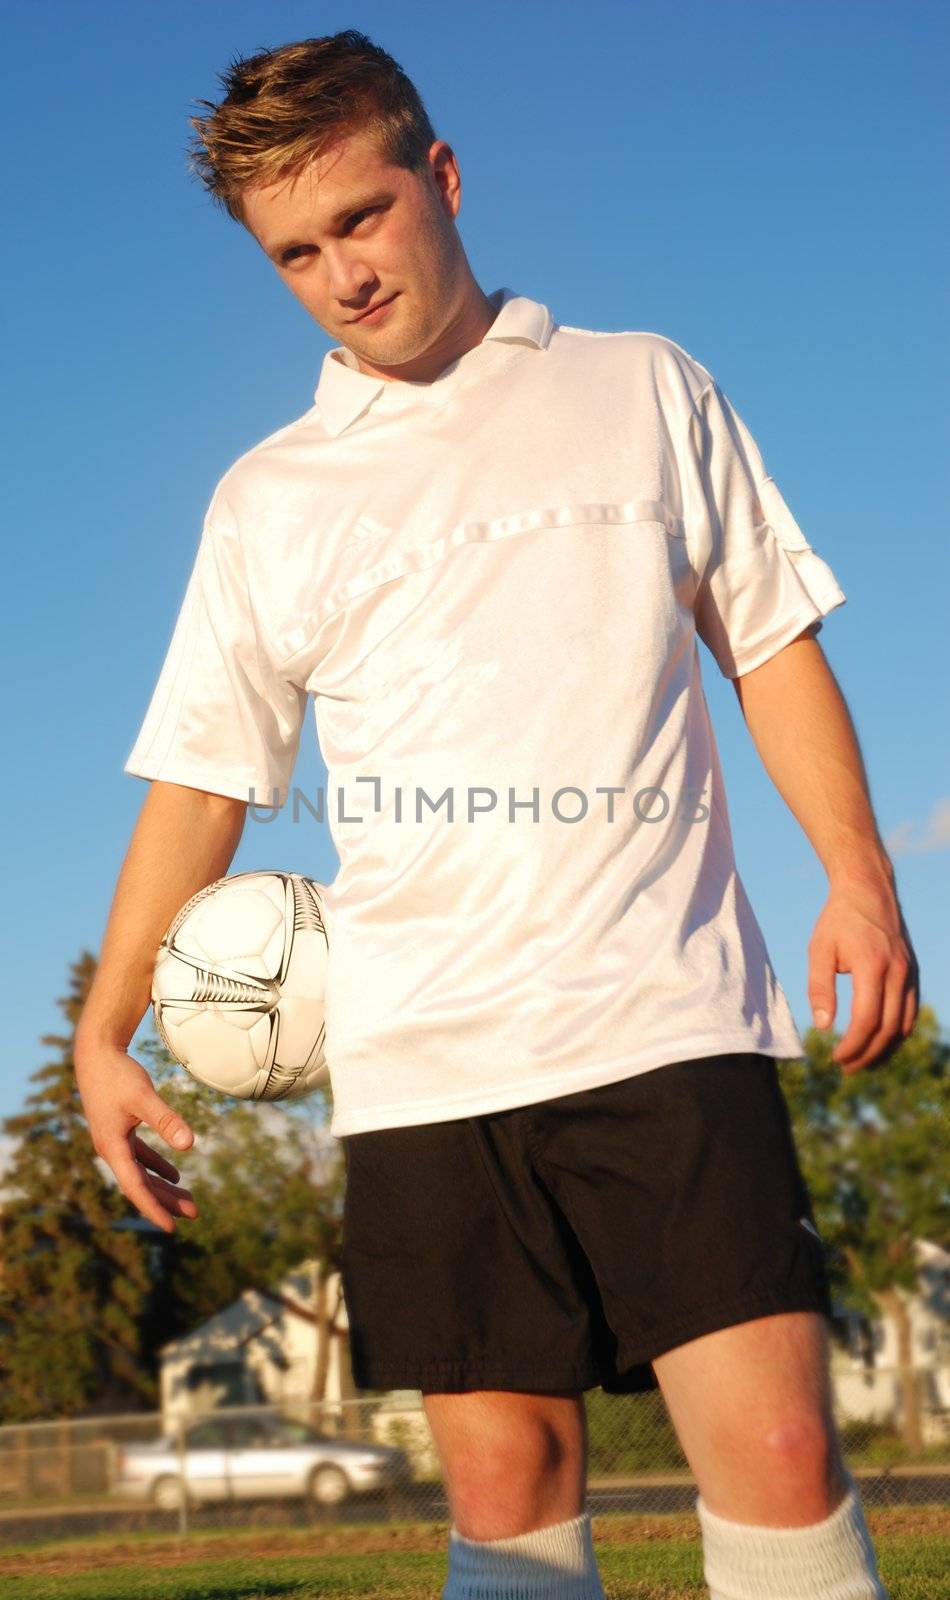 A soccer player in a field
